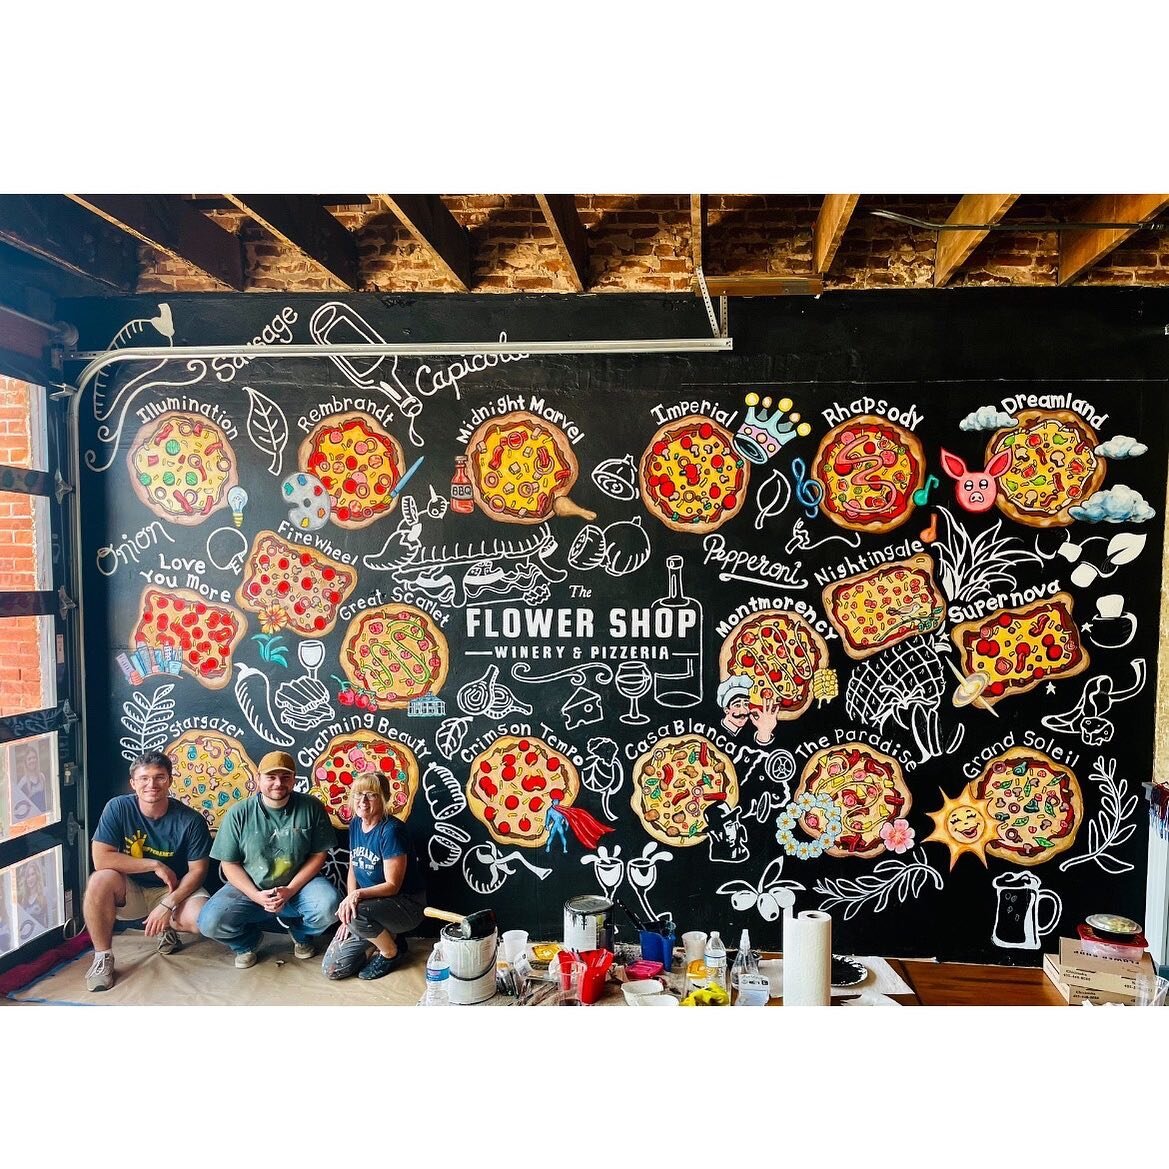 The Flower Shop Winery and Pizzeria  in Chickasha is getting some fun murals courtesy of The Chickasha Art Center! This one should be finished this week! Special thanks to Sean Brown and Mike Hixson for their help today!